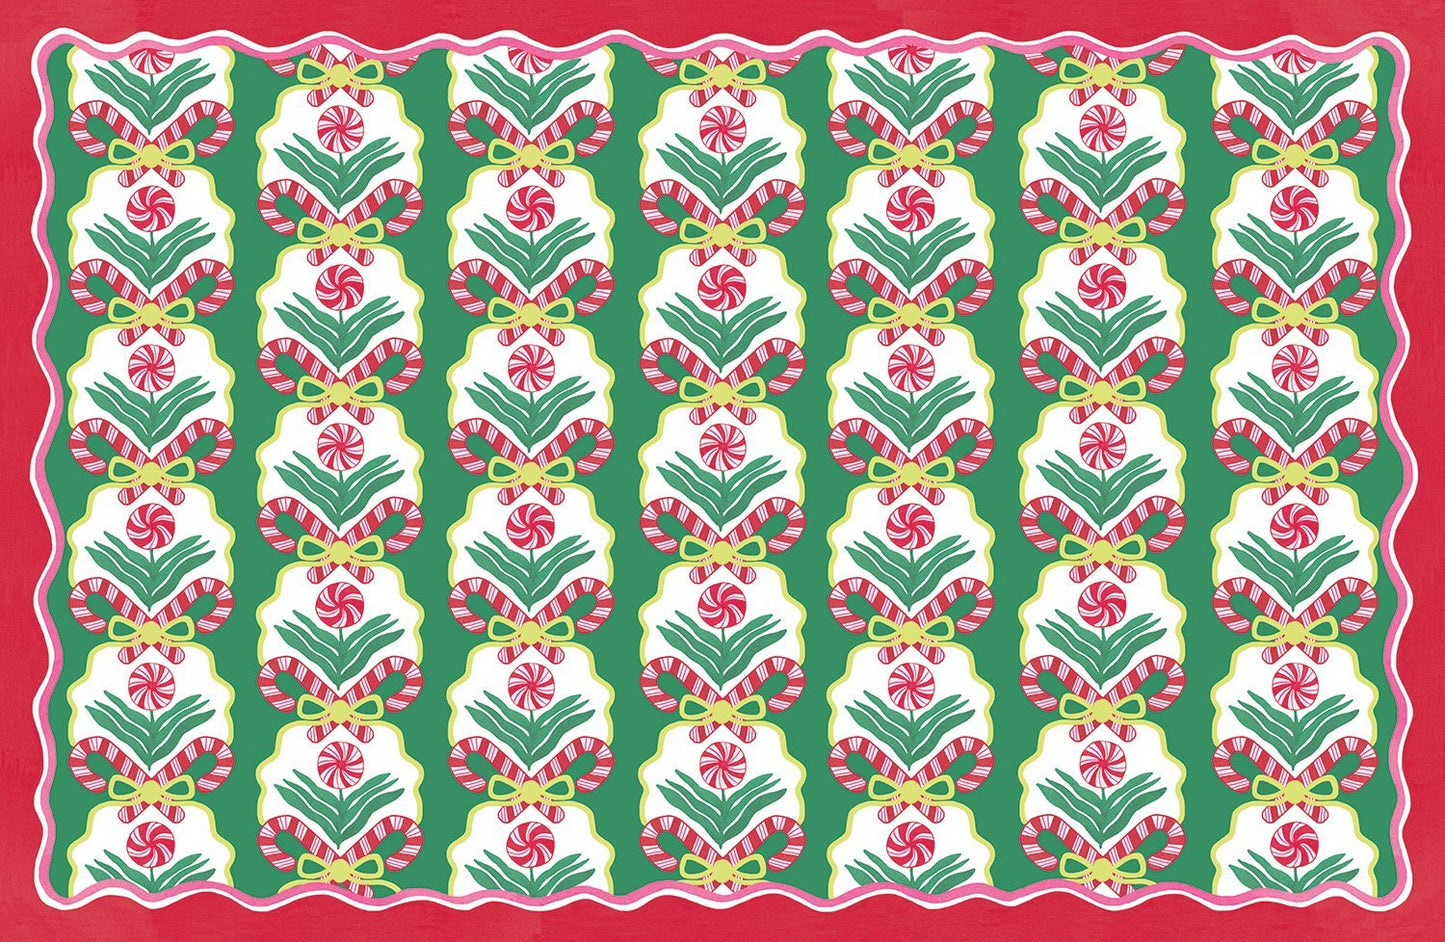 Paper placemat featuring red and green peppermint candy pattern on a green background with a red border